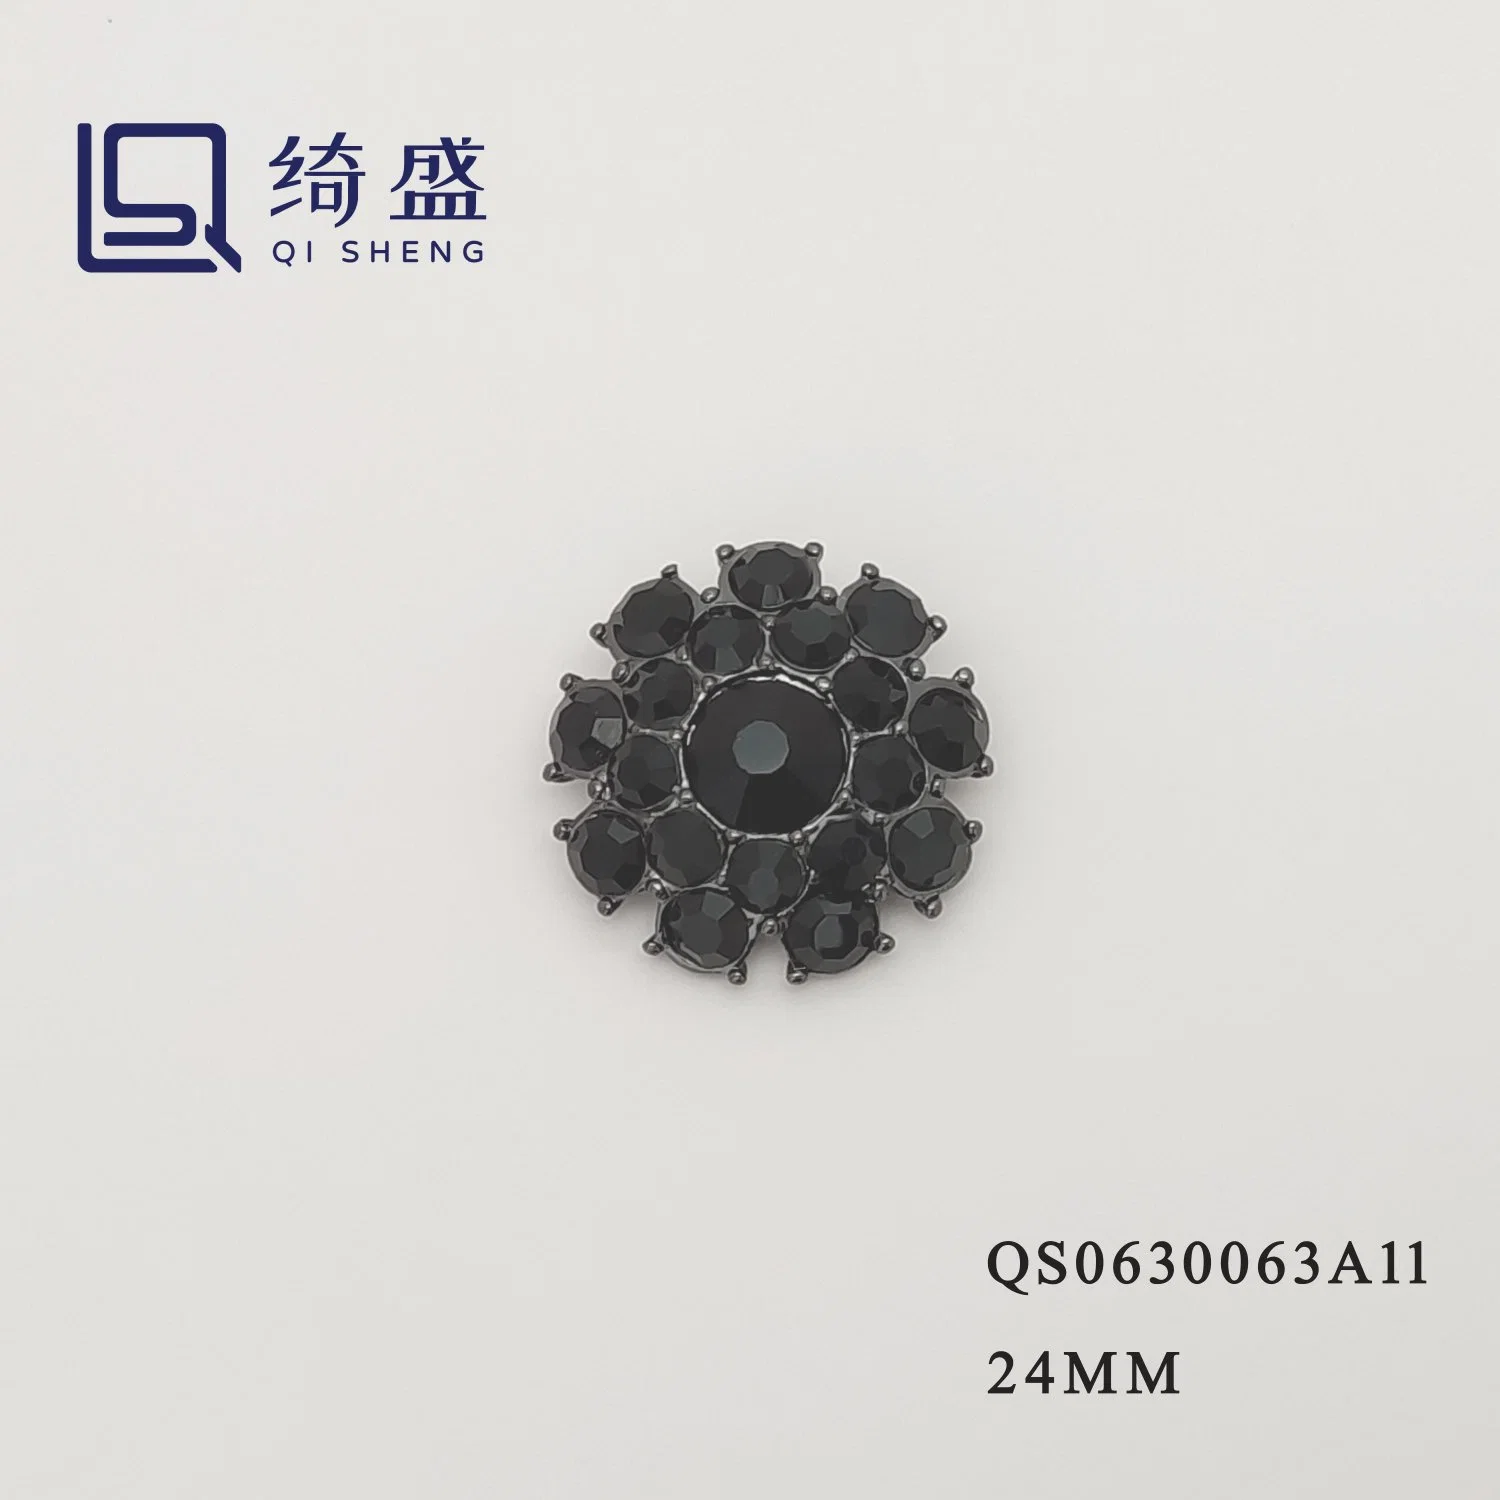 Factory Supply Fashion Design Alloy/Fancy/Metal/Shank/Rhinstone Button for Shirts/Coat/Sweater/Bags